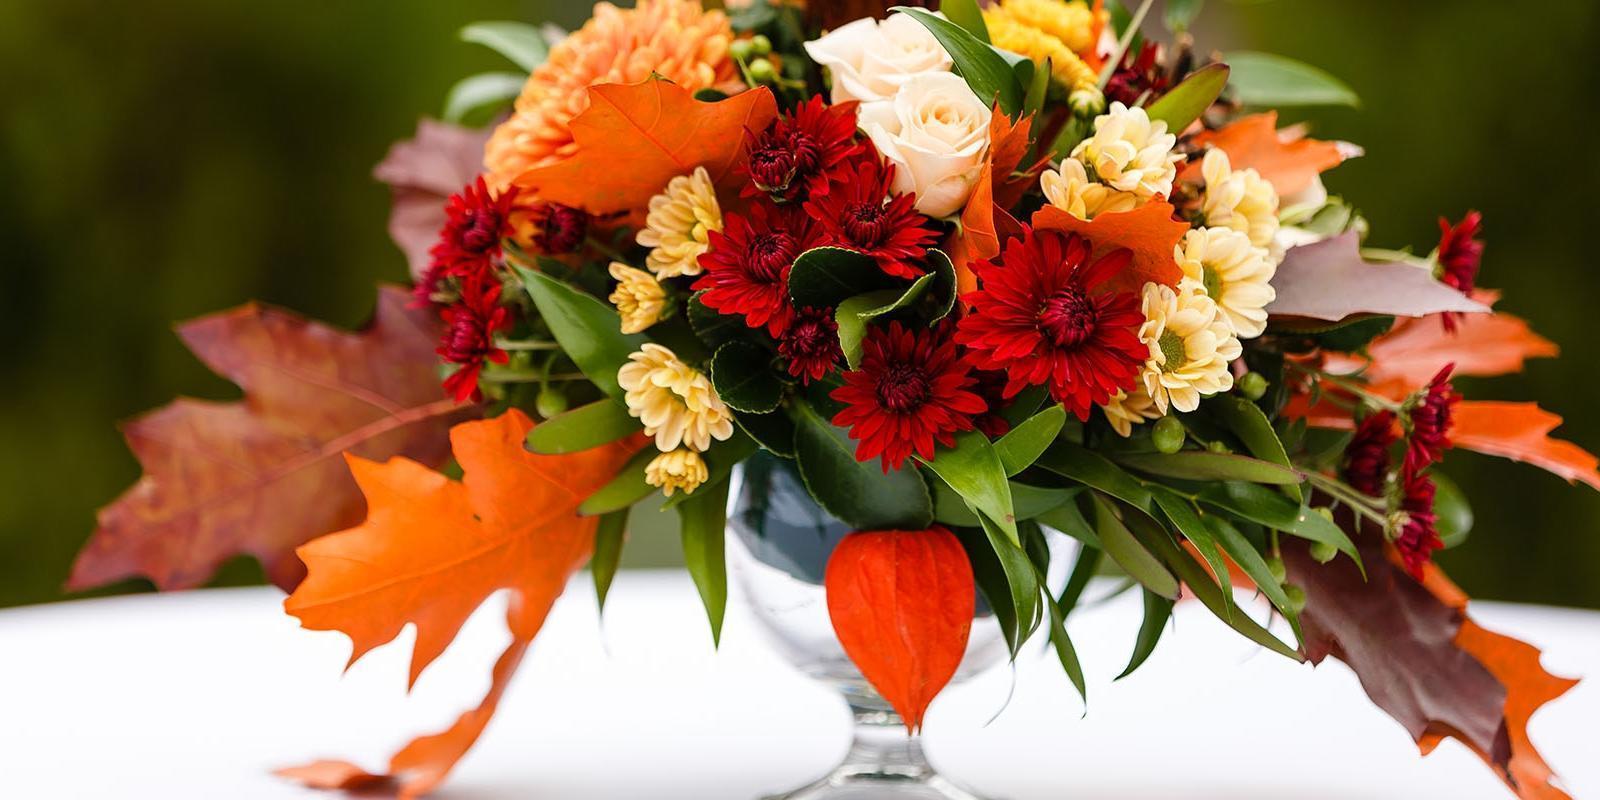 October flowers: which fits this season?